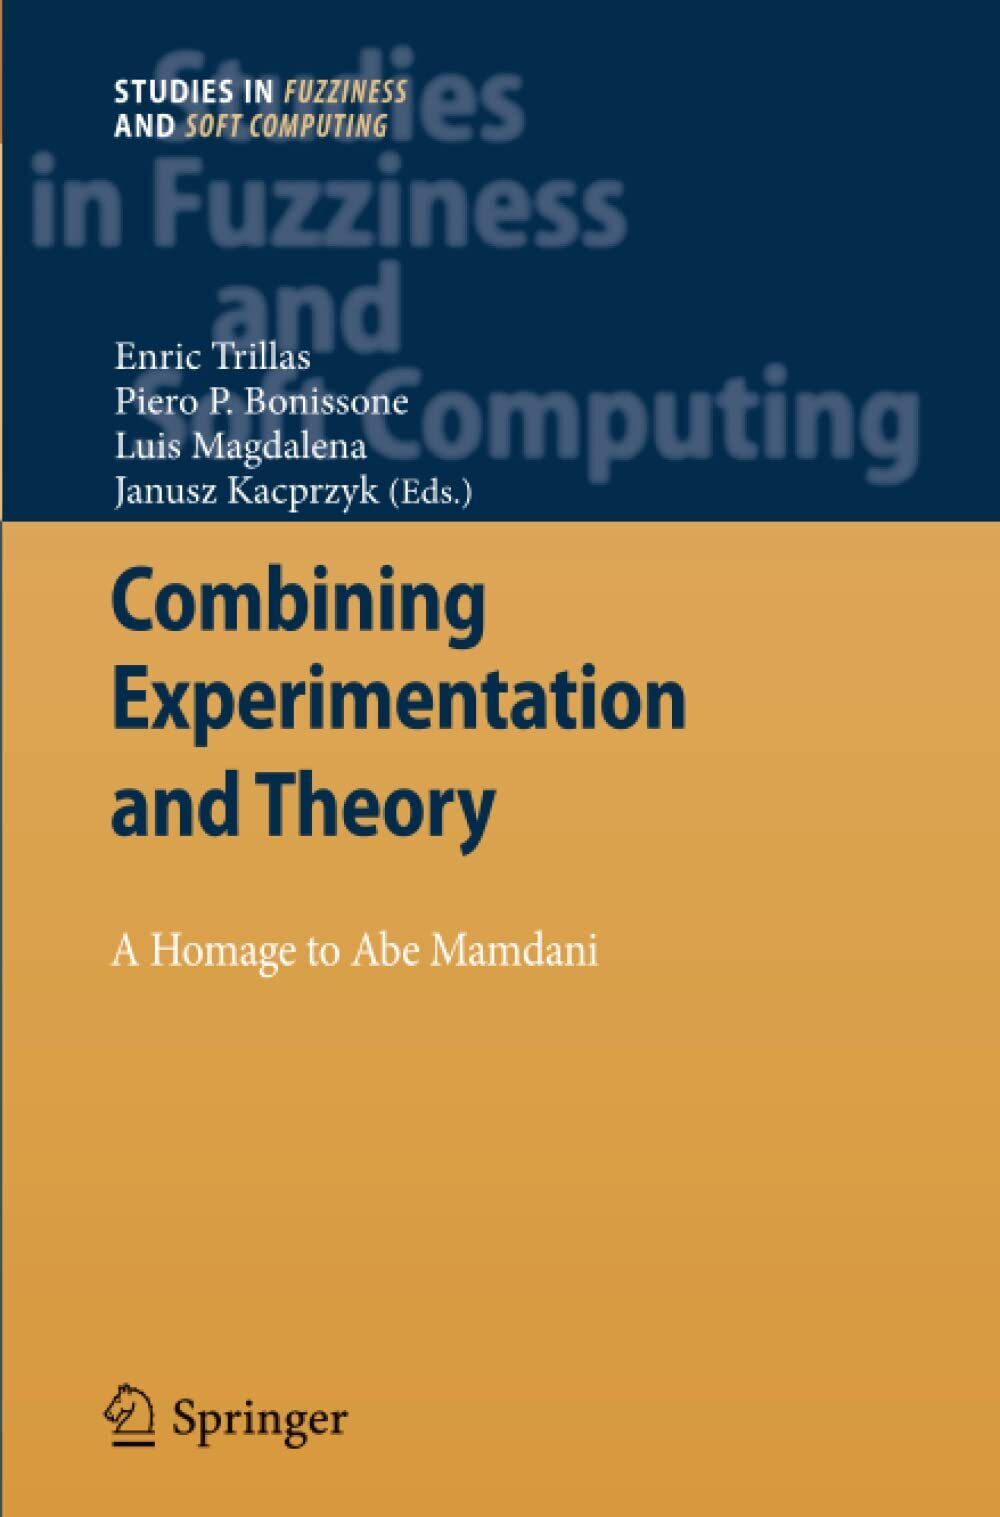 Combining Experimentation and Theory - Enric Trillas - Springer, 2014